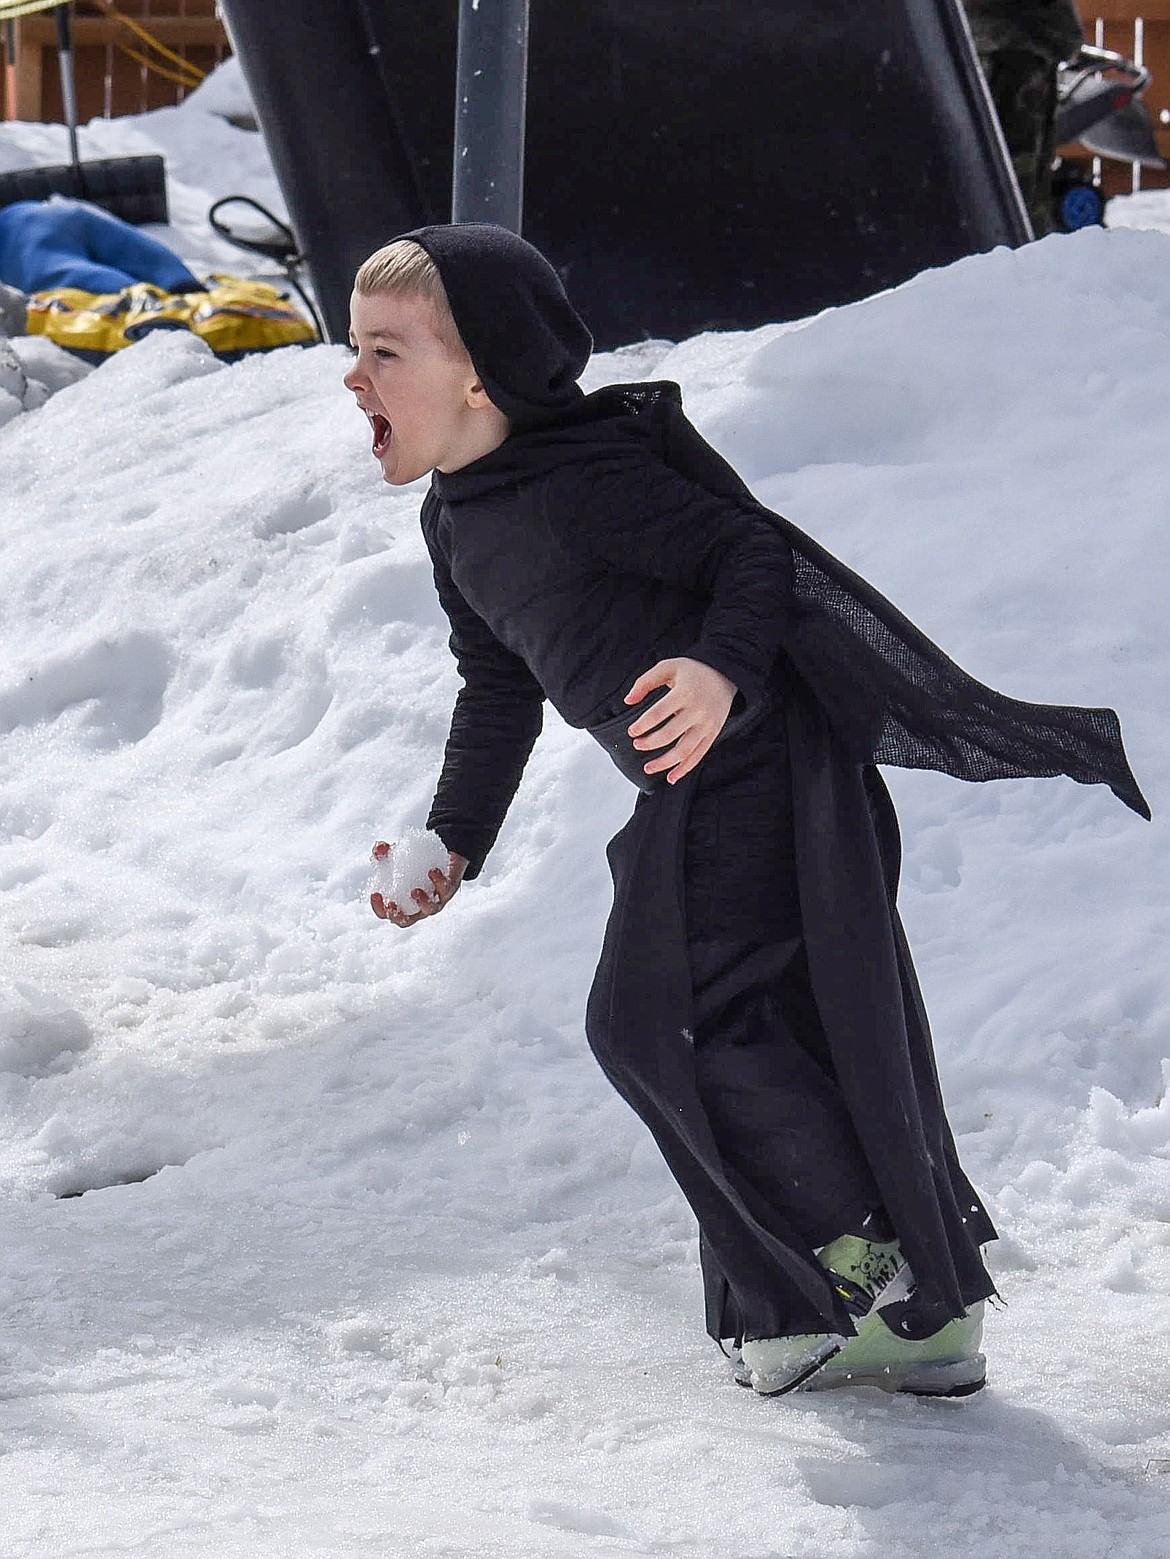 Timber Parker -- in a Darth Vader costume -- charges in with a snowball during free moment of horseplay at Crazy Dayz. (Ben Kibbey/The Western News)